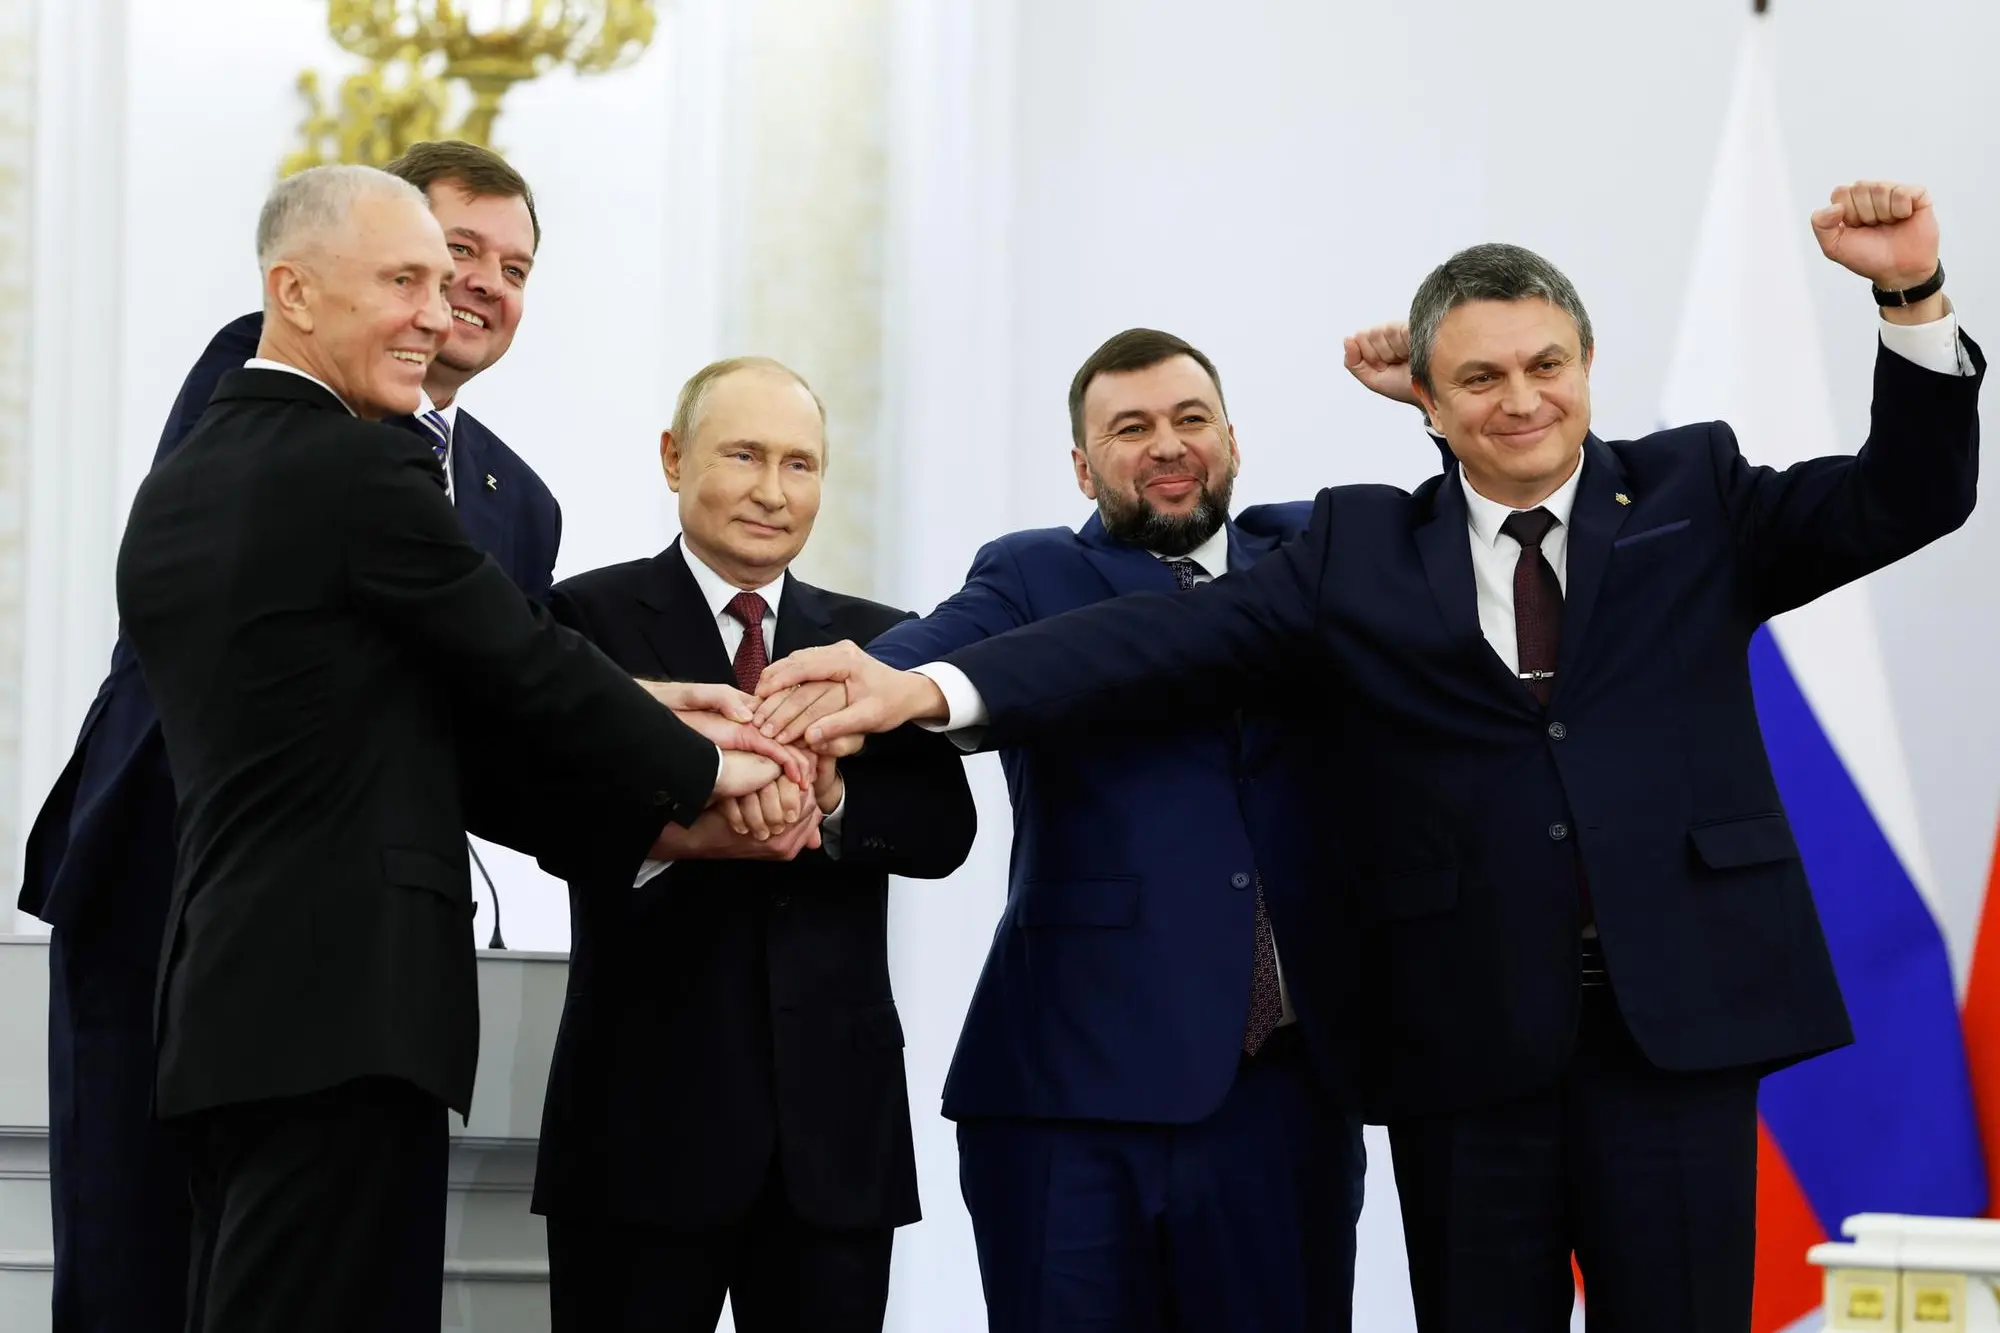 epa10216023 Russian President Vladimir Putin (C) with Head of the Donetsk People's Republic Denis Pushilin (2-R), Head of the Luhansk People's Republic Leonid Pasechnik (R), Head of the Zaporozhye Region Yevhen Balitsky (2-L), Head of the Kherson Region Vladimir Saldo (L) celebrate during a ceremony to sign treaties on new territories' accession to Russia at the Grand Kremlin Palace in Moscow, Russia, 30 September 2022. From 23 to 27 September, residents of the self-proclaimed Luhansk and Donetsk People's Republics as well as the Russian-controlled areas of the Kherson and Zaporizhzhia regions of Ukraine voted in a so-called 'referendum' to join the Russian Federation. EPA/DMITRY ASTAKHOV / SPUTNIK / KREMLIN POOL MANDATORY CREDIT